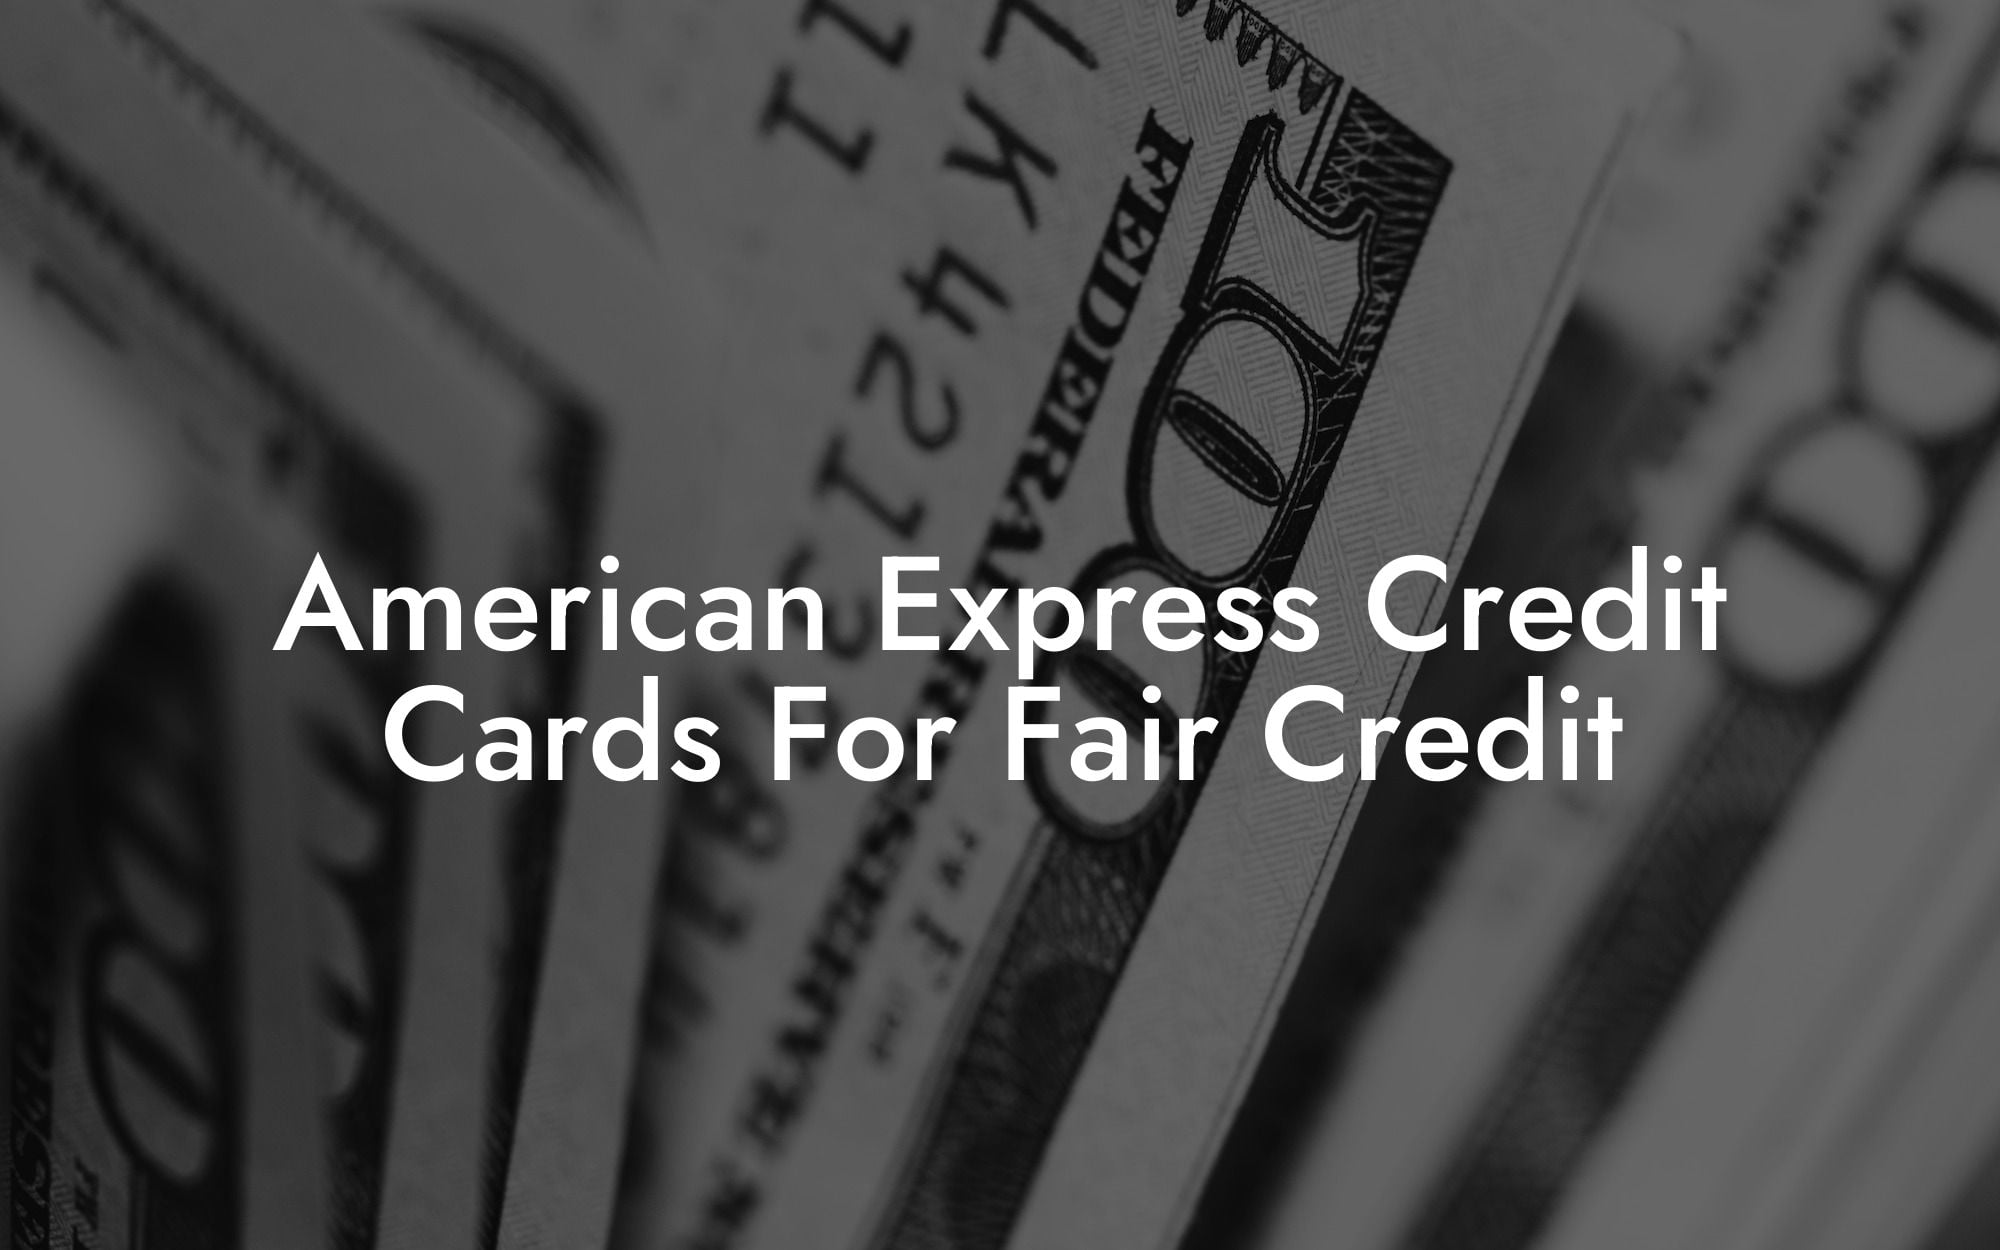 American Express Credit Cards For Fair Credit